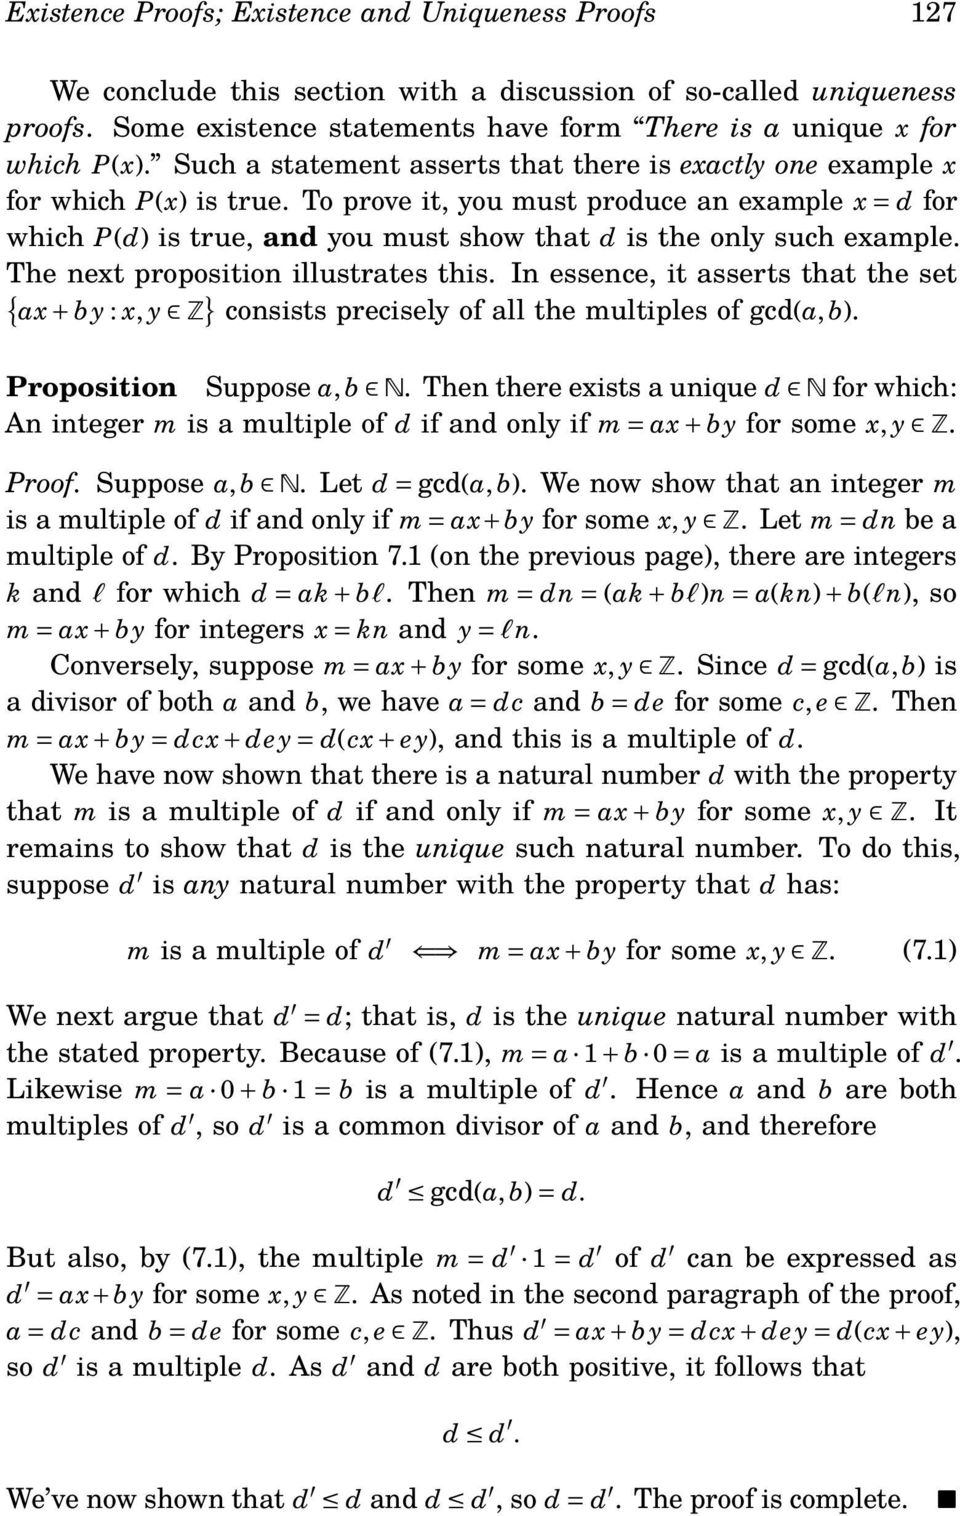 To prove it, you must produce an example x = d for which P(d) is true, and you must show that d is the only such example. The next proposition illustrates this.